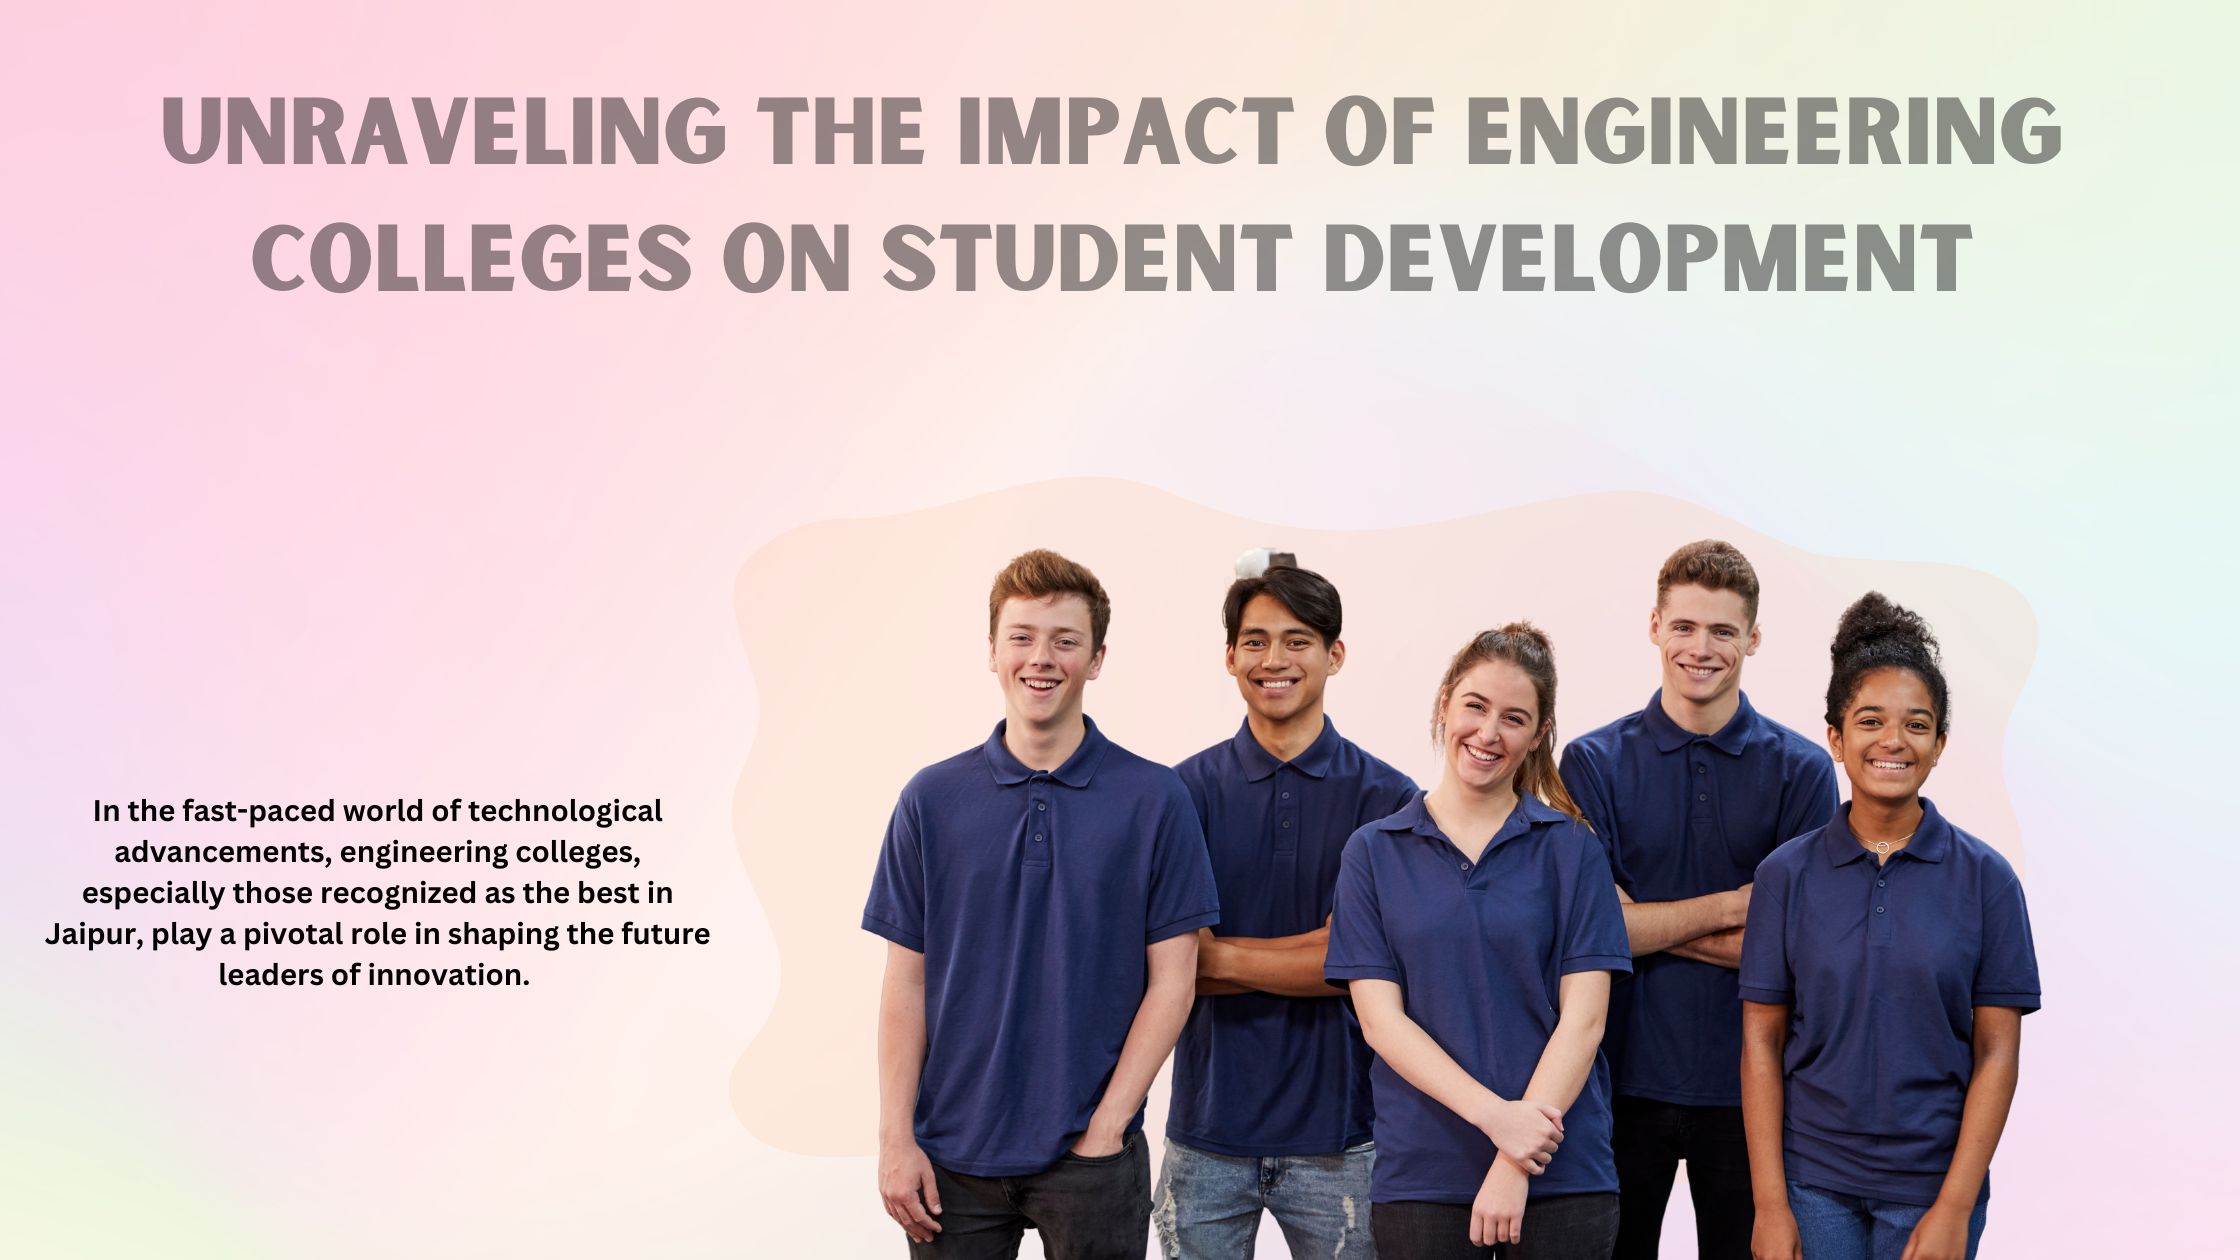 Unraveling the Impact of Engineering Colleges on Student Development